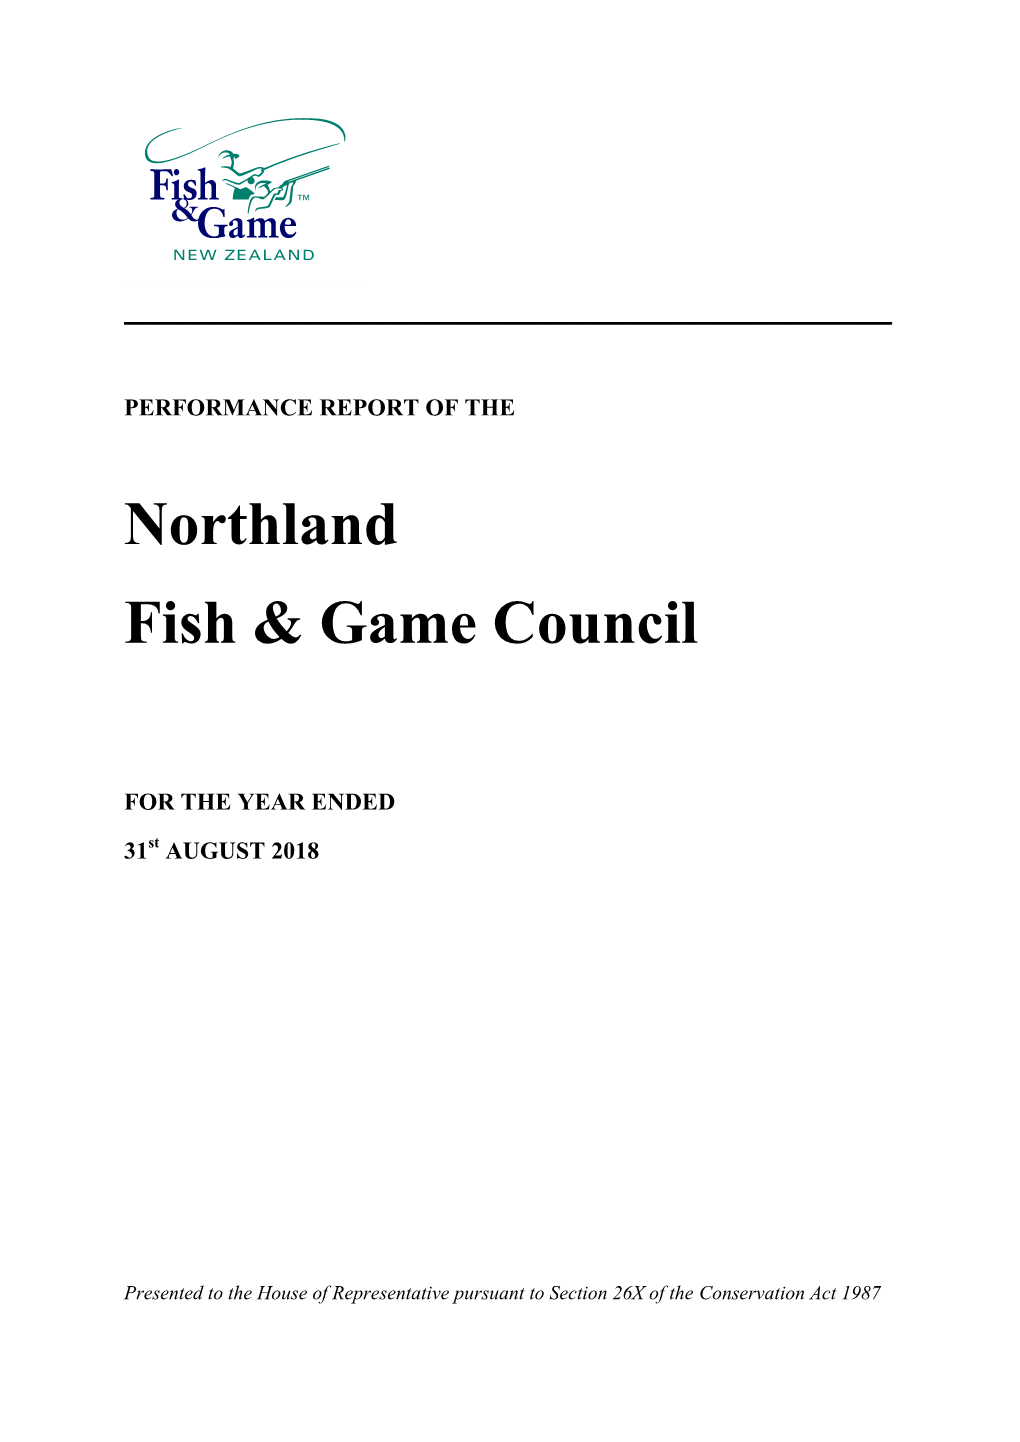 Northland Fish & Game Council